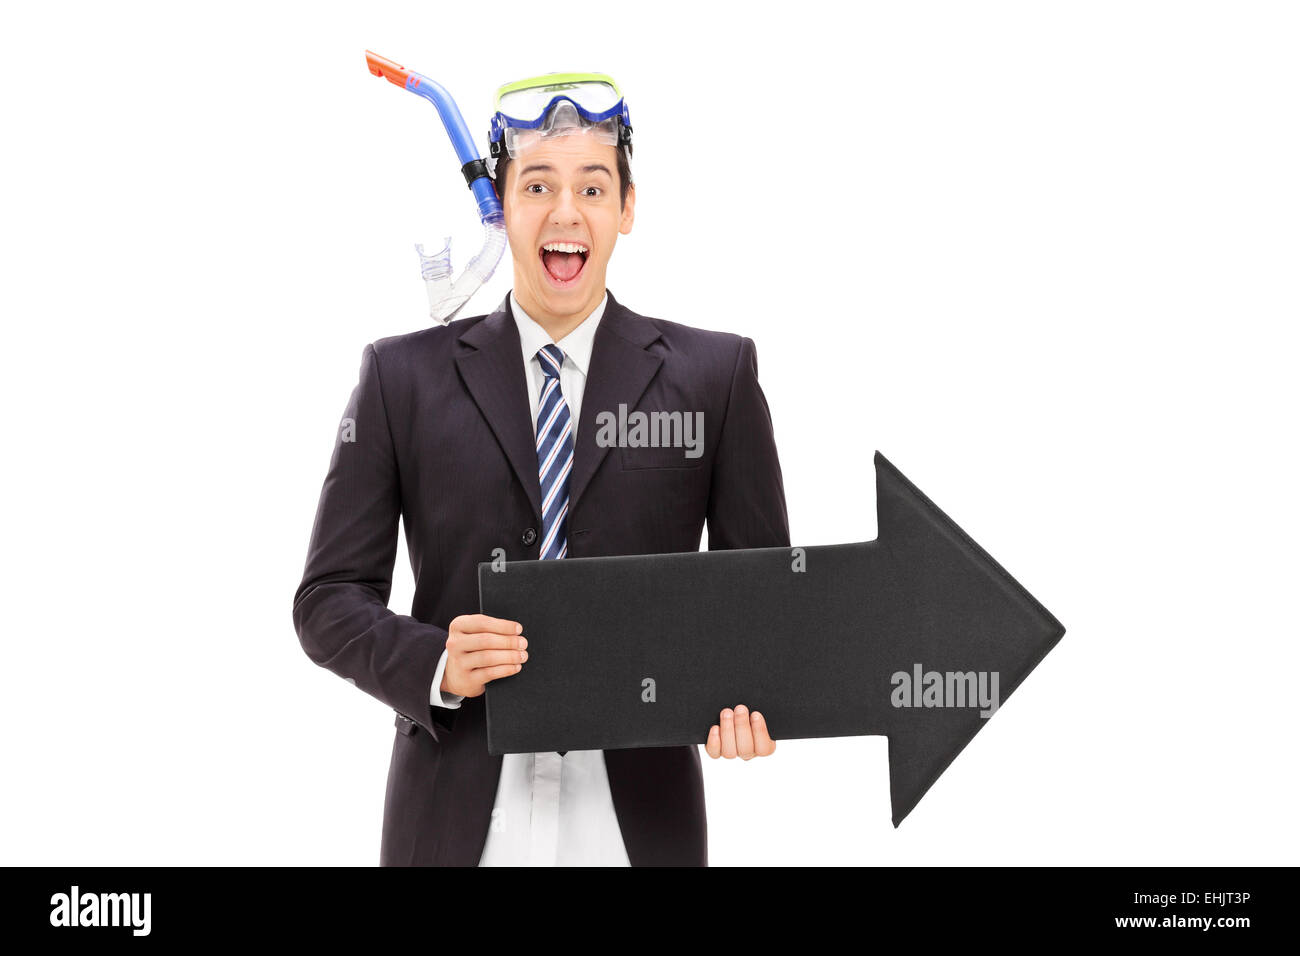 Businessman with diving equipment holding an arrow isolated on white background Stock Photo